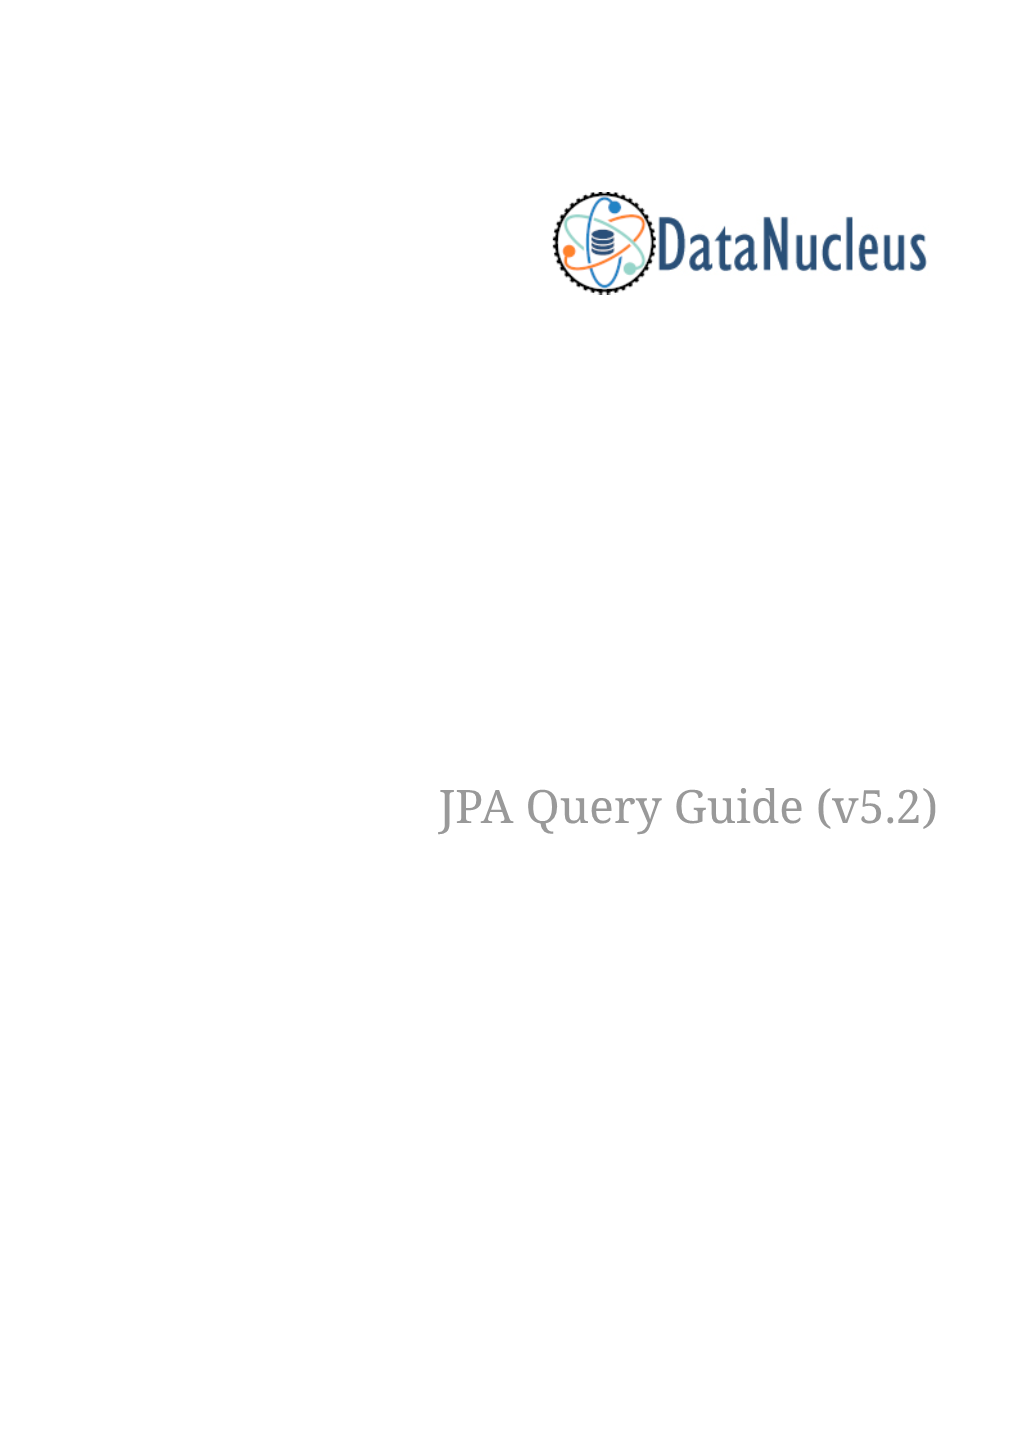 JPA Query Guide (V5.2) Table of Contents